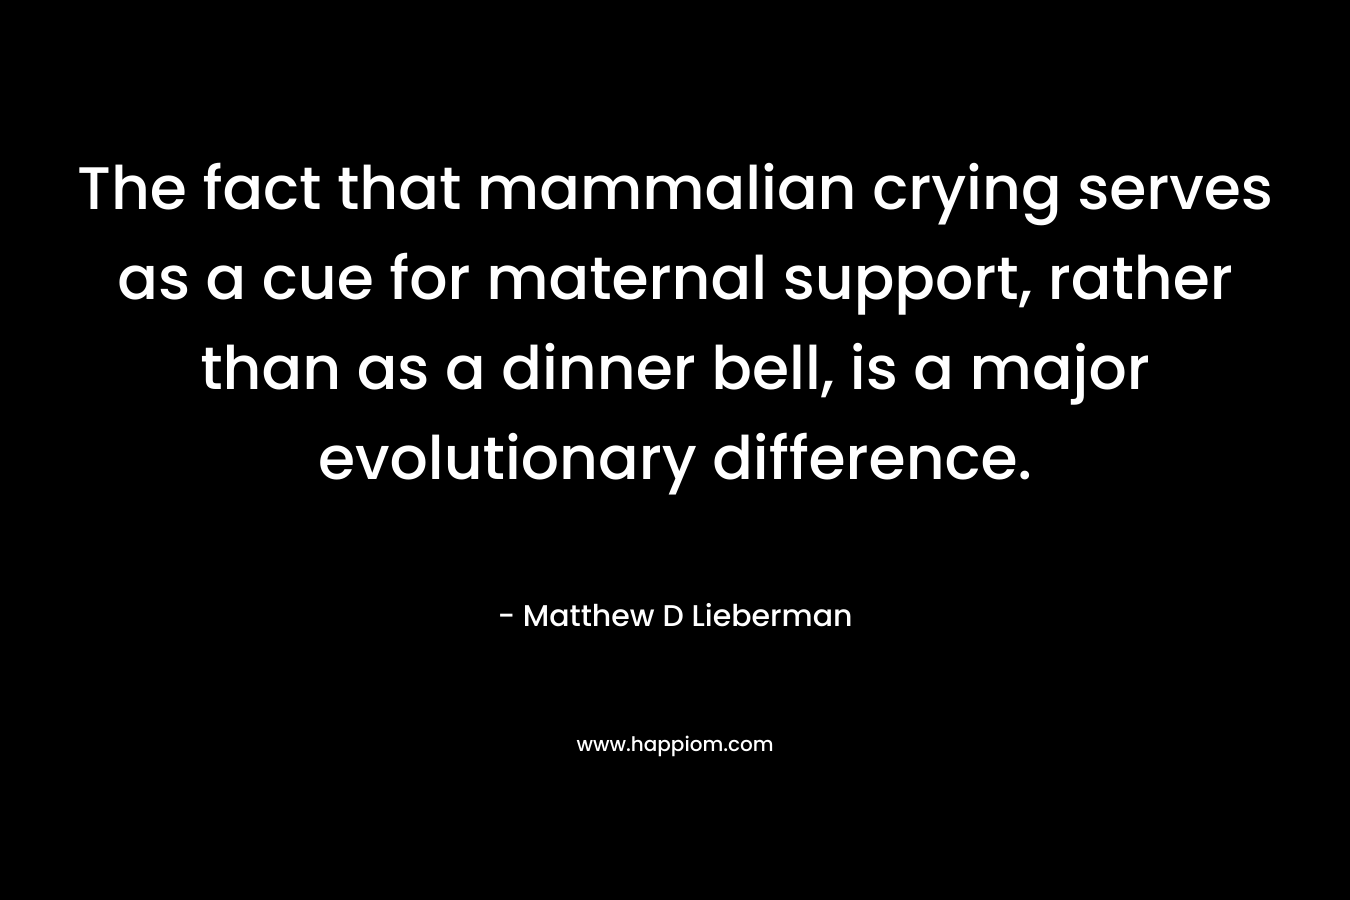 The fact that mammalian crying serves as a cue for maternal support, rather than as a dinner bell, is a major evolutionary difference. – Matthew D Lieberman